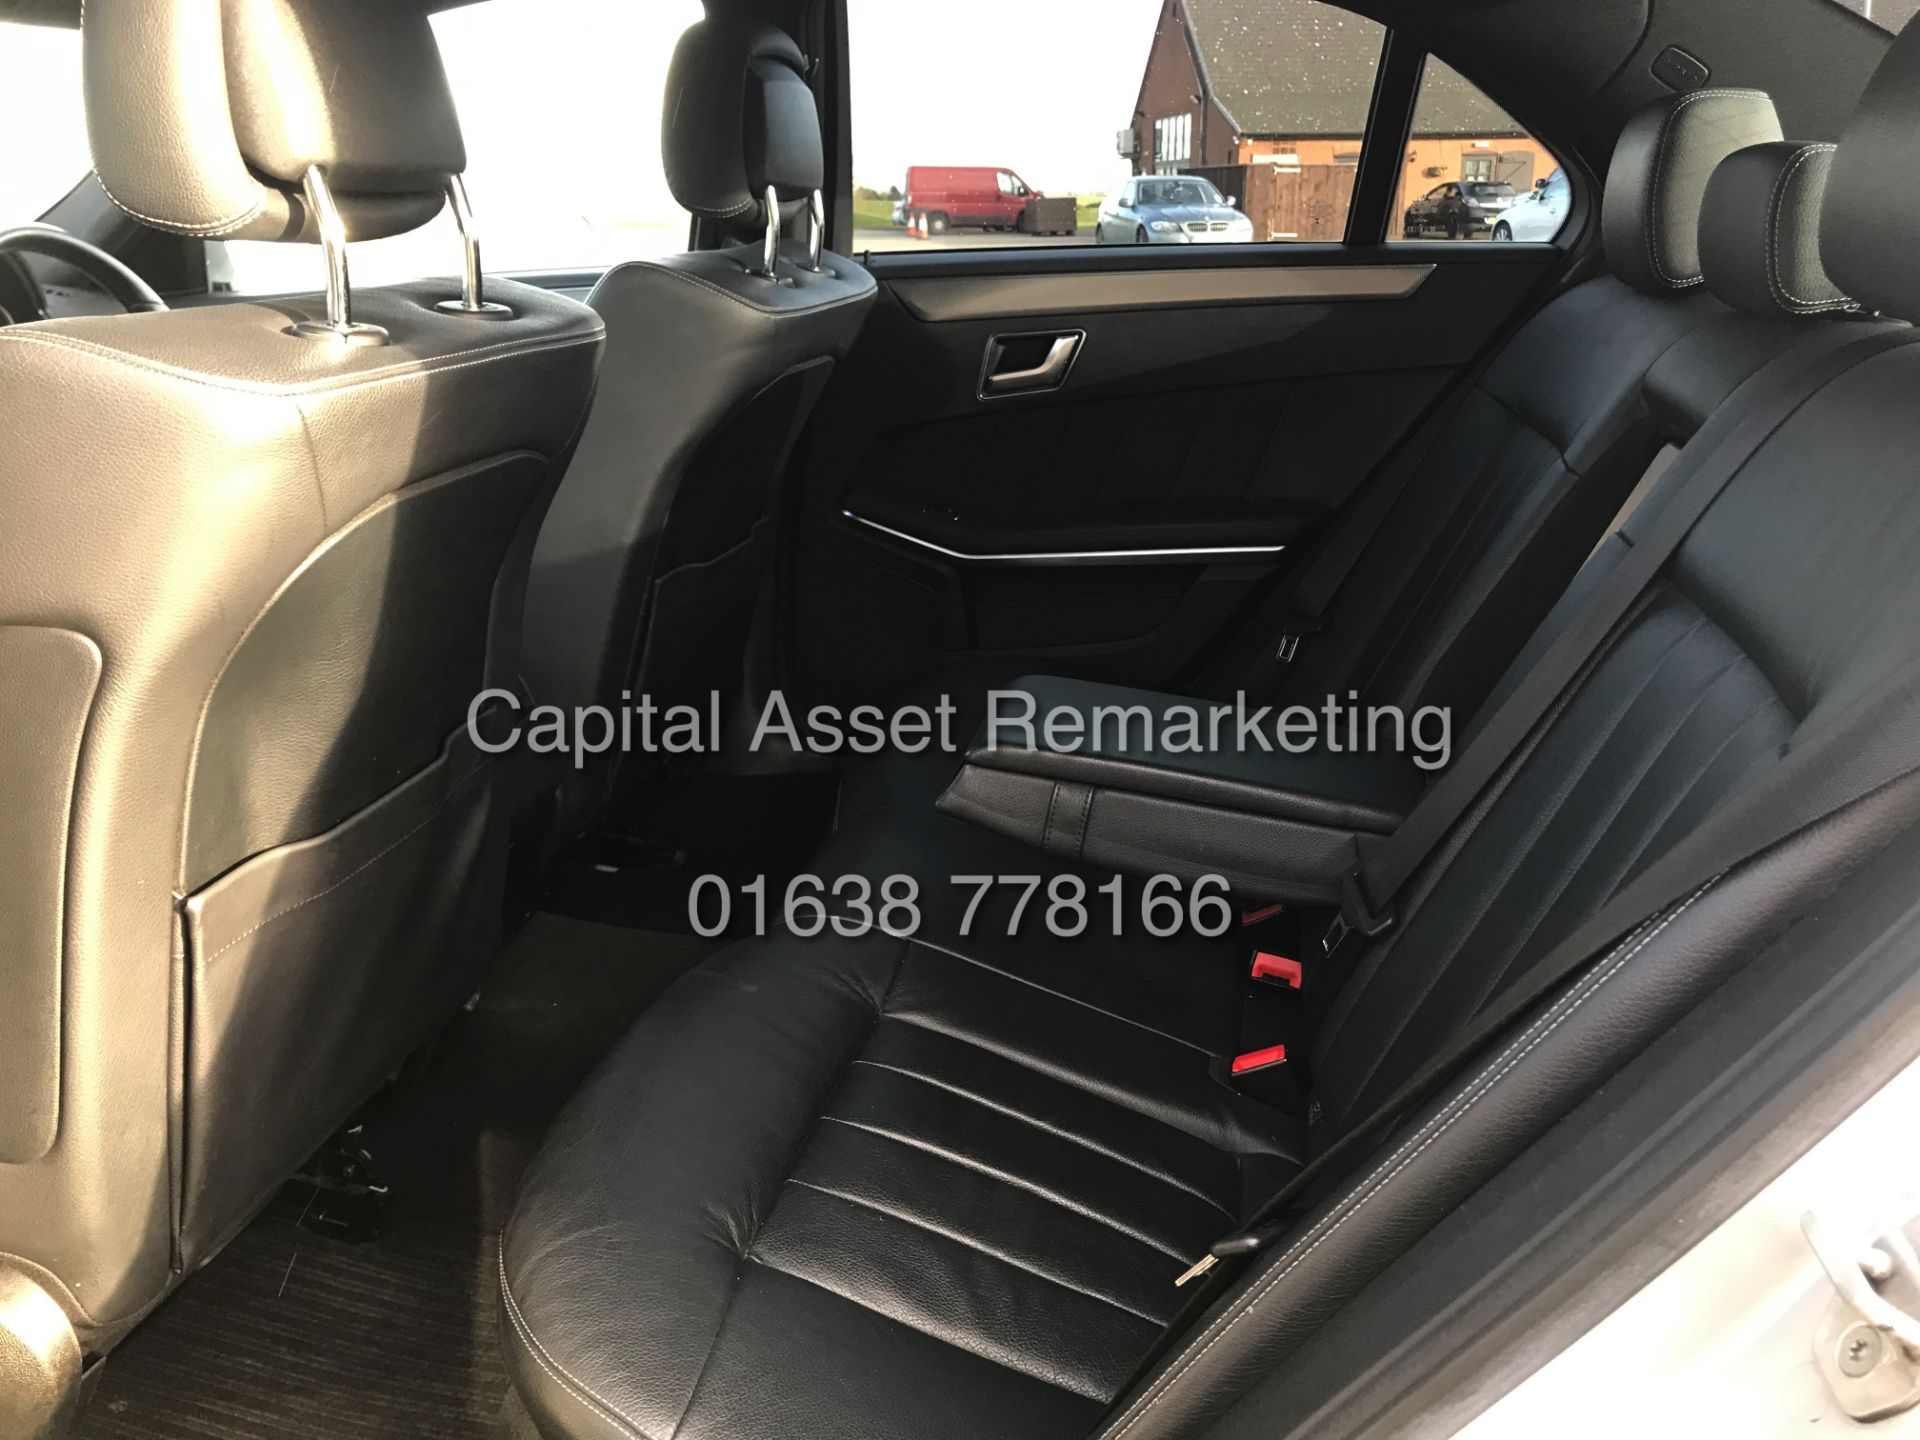 MERCEDES E220d "SPECIAL EQUIPMENT" 7G TRONIC AUTO (2015 MODEL) 1 OWNER - SAT NAV - LEATHER - Image 26 of 26